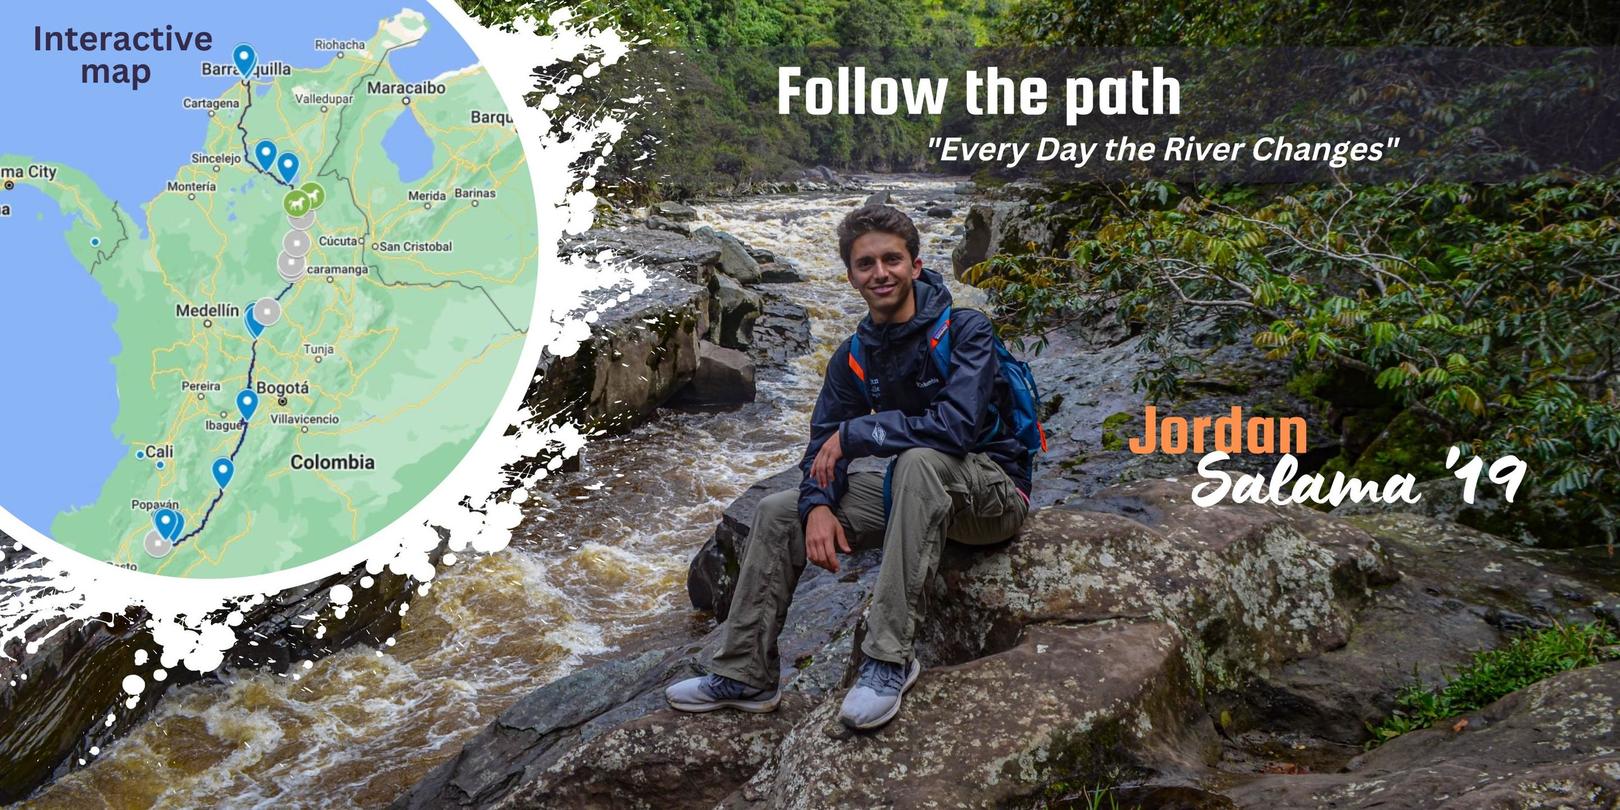 Jordan Salama wearing hiking gear and sitting on rocks by a river in the middle of a forest. The image also features an overlay of a map showcasing all the stops on his trip.